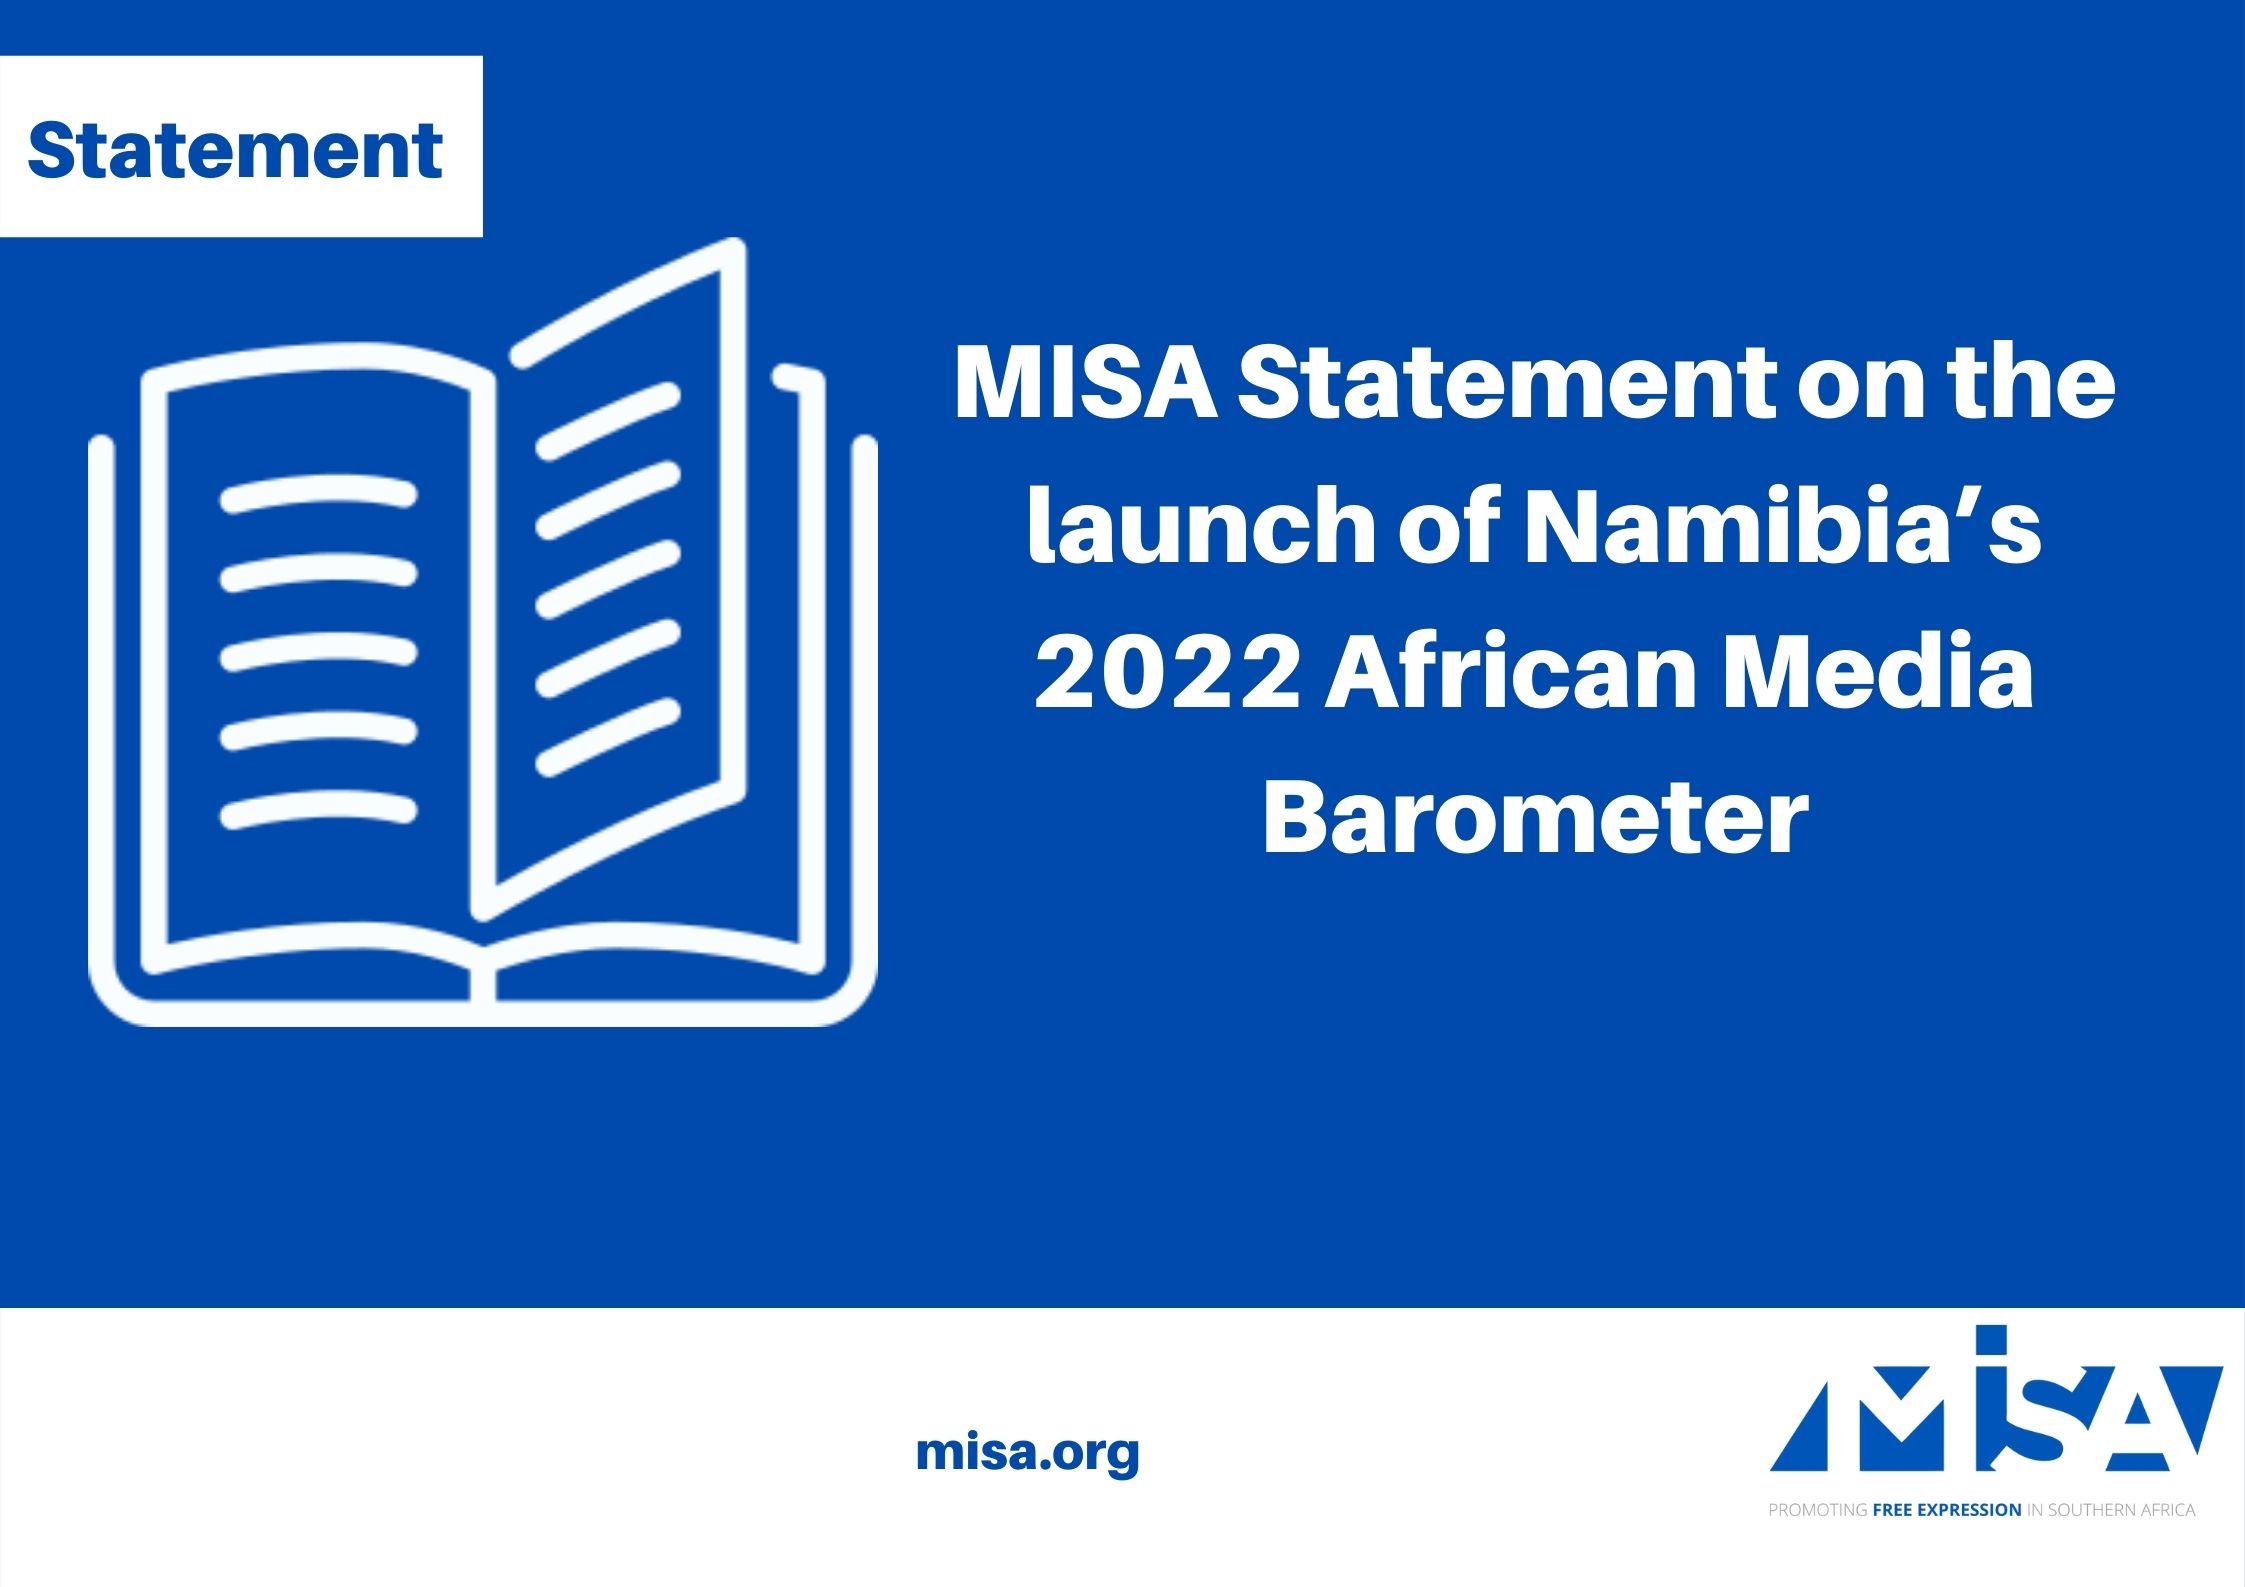 MISA Statement on the launch of Namibia’s 2022 African Media Barometer